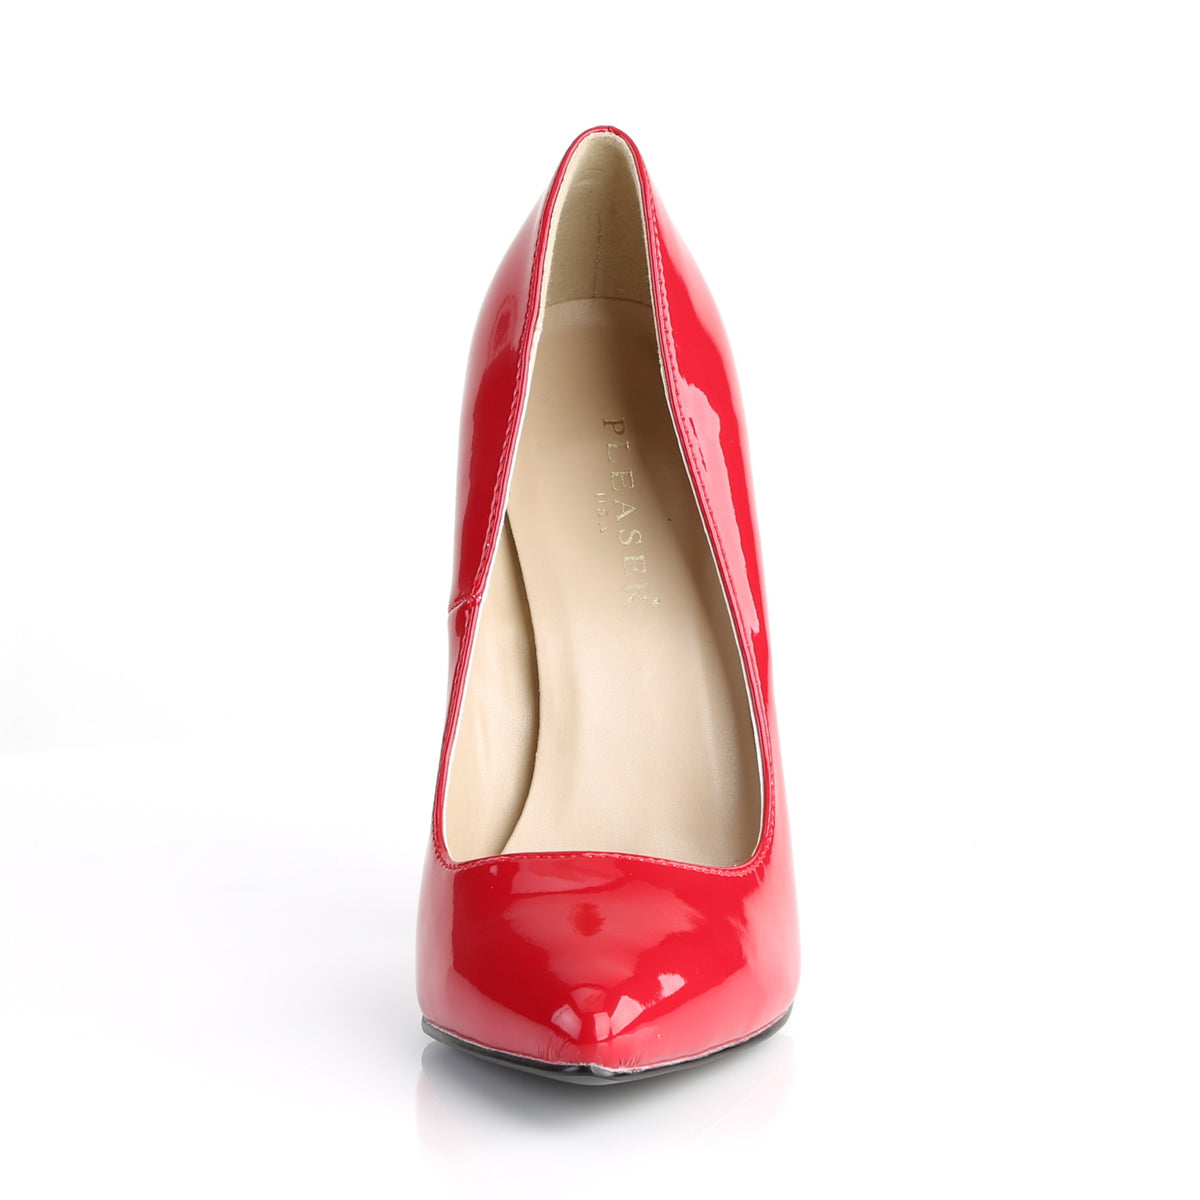 SEXY-20 Red Patent Pump Pleaser